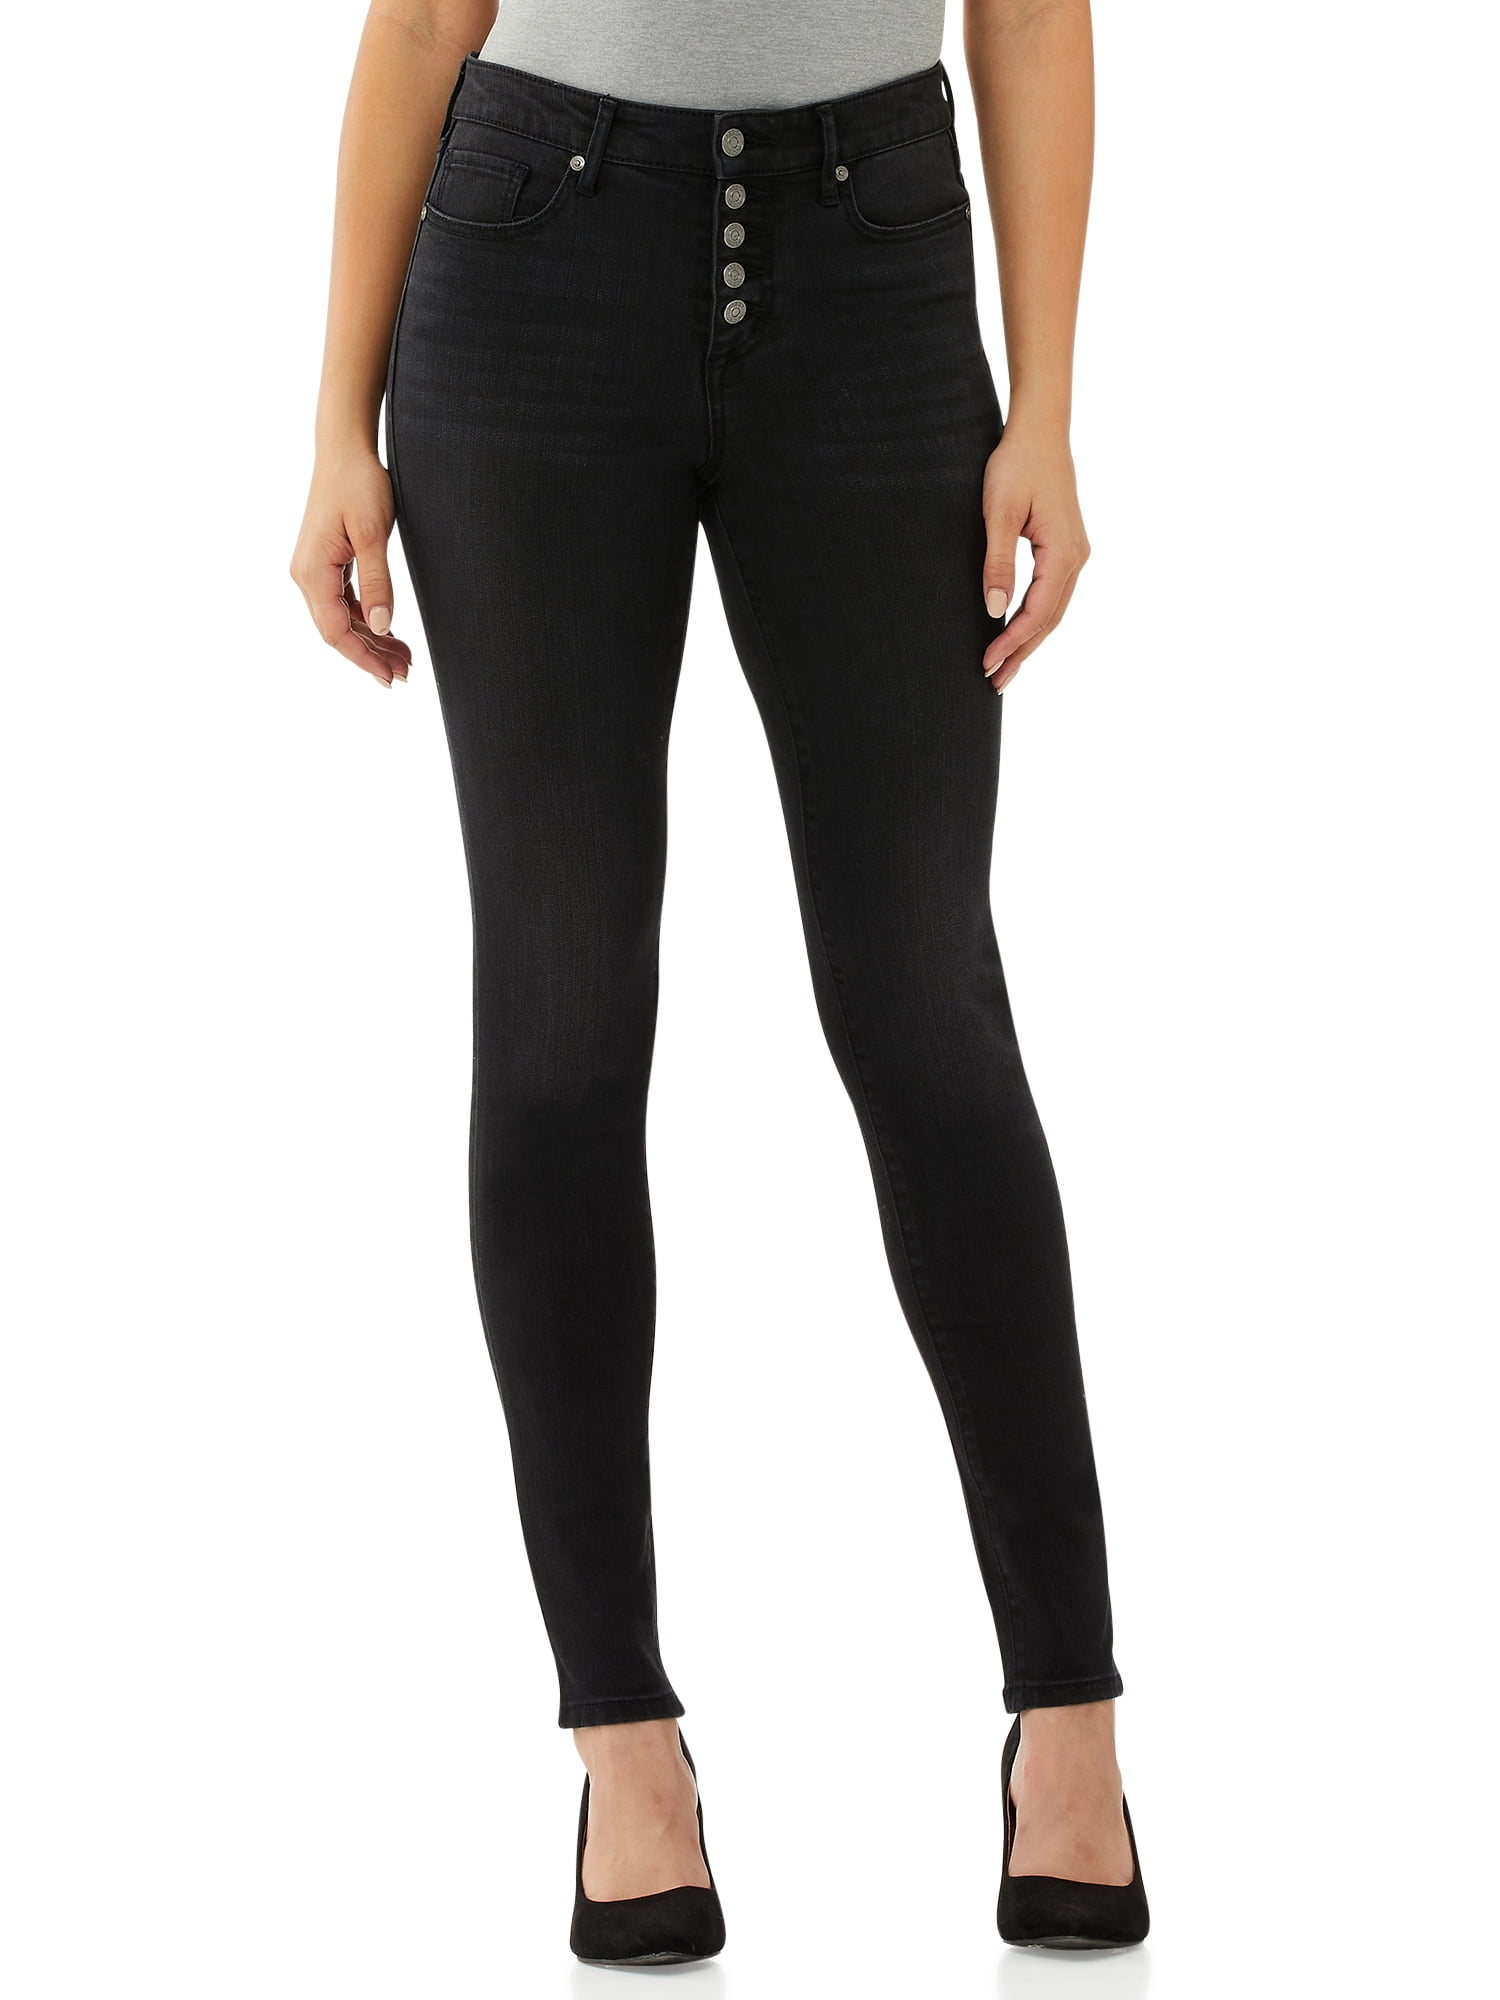 Scoop Women’s High-Rise Jeans with Button Fly - Walmart.com